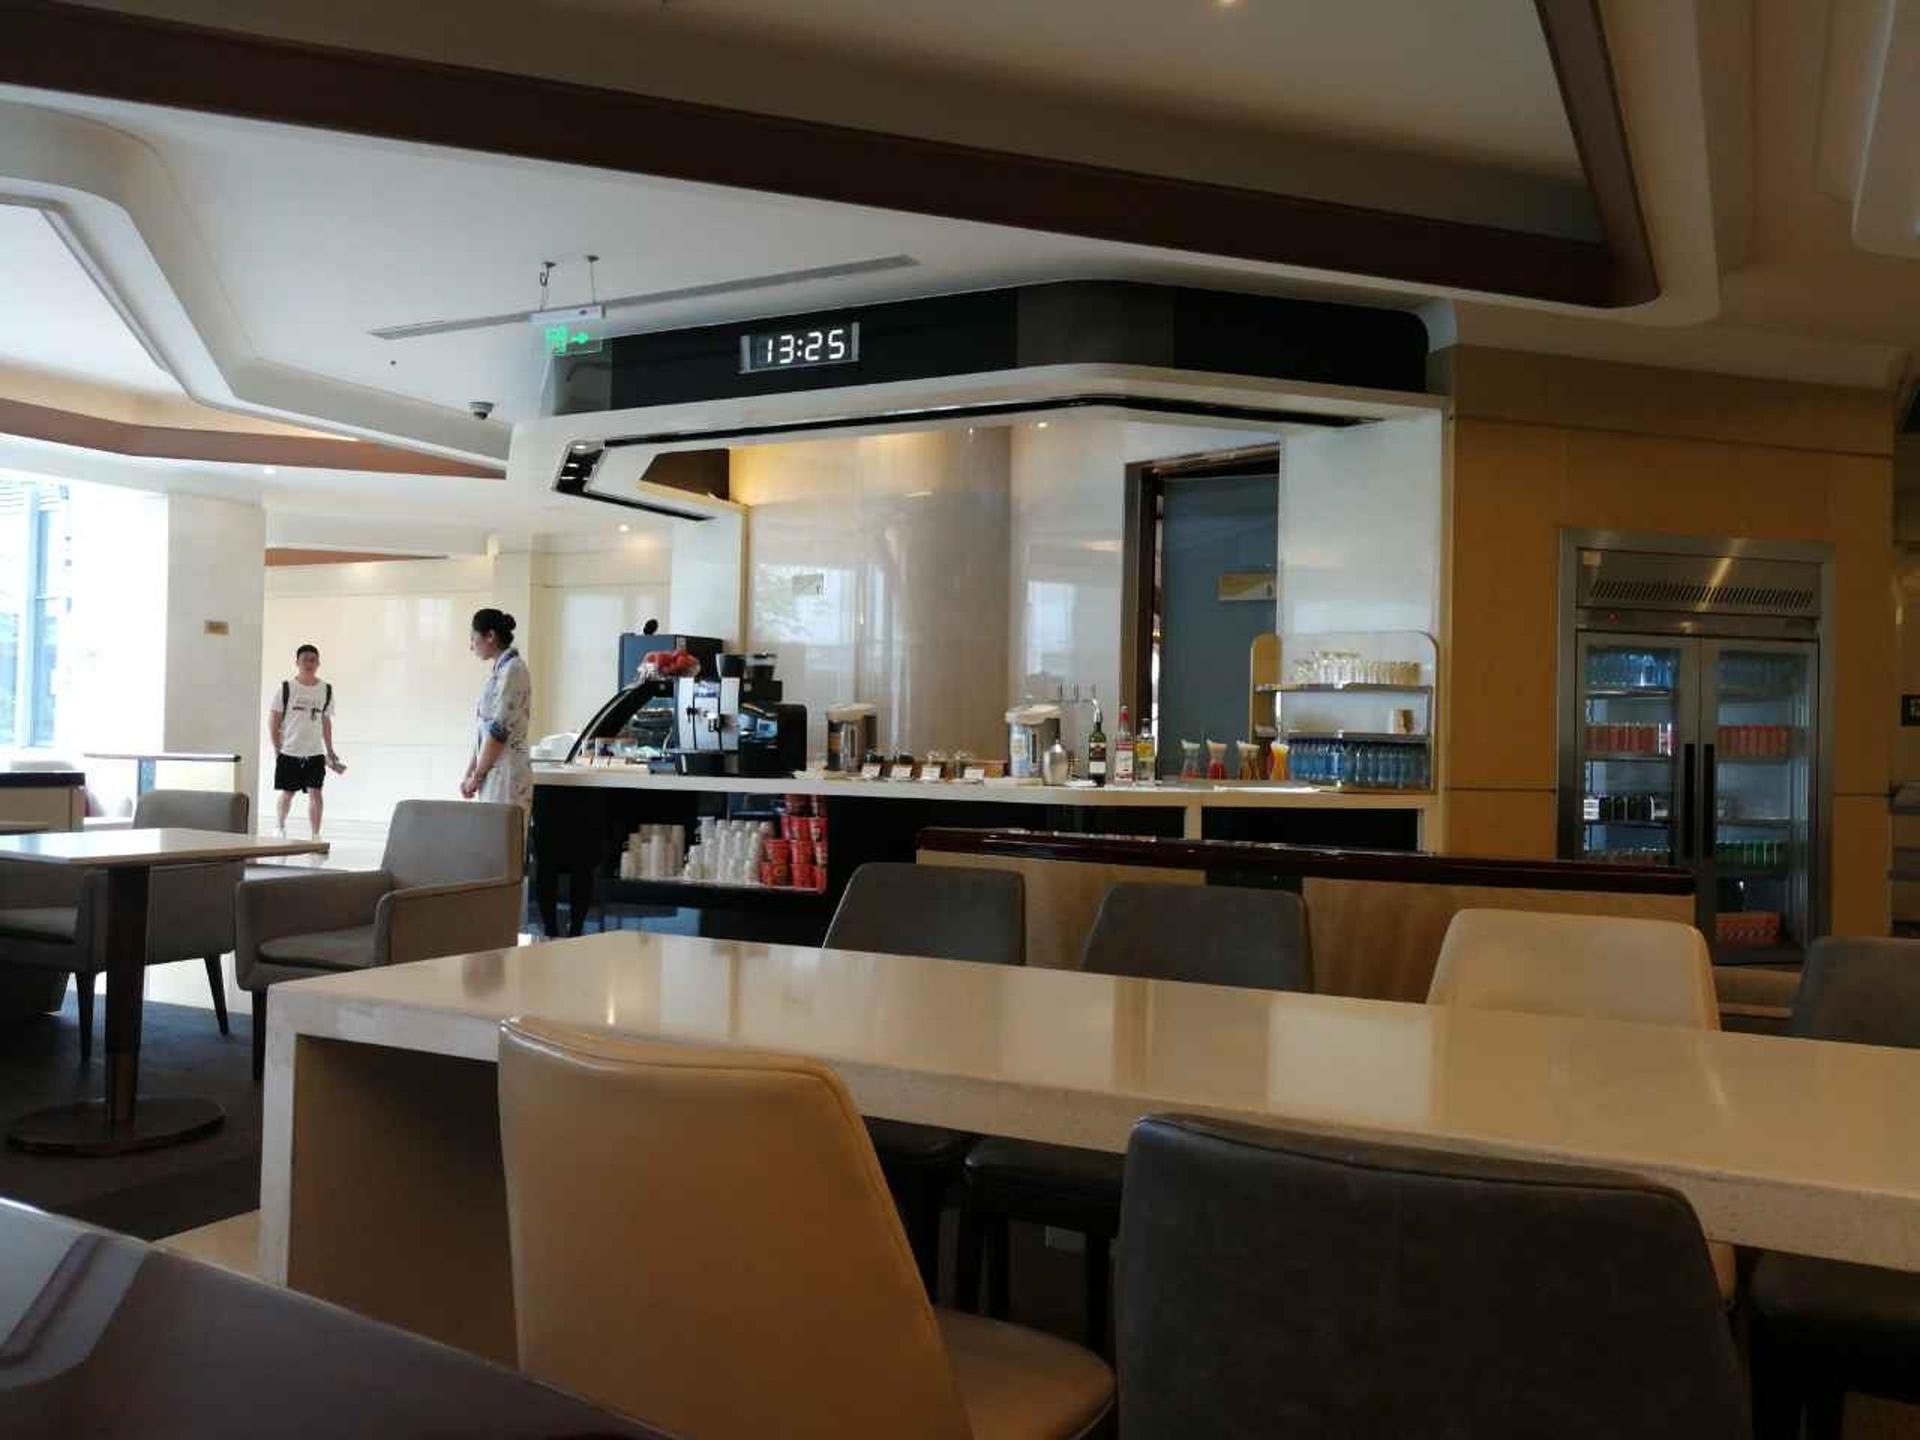 Hainan Airlines Fortune Wings Lounge image 1 of 2